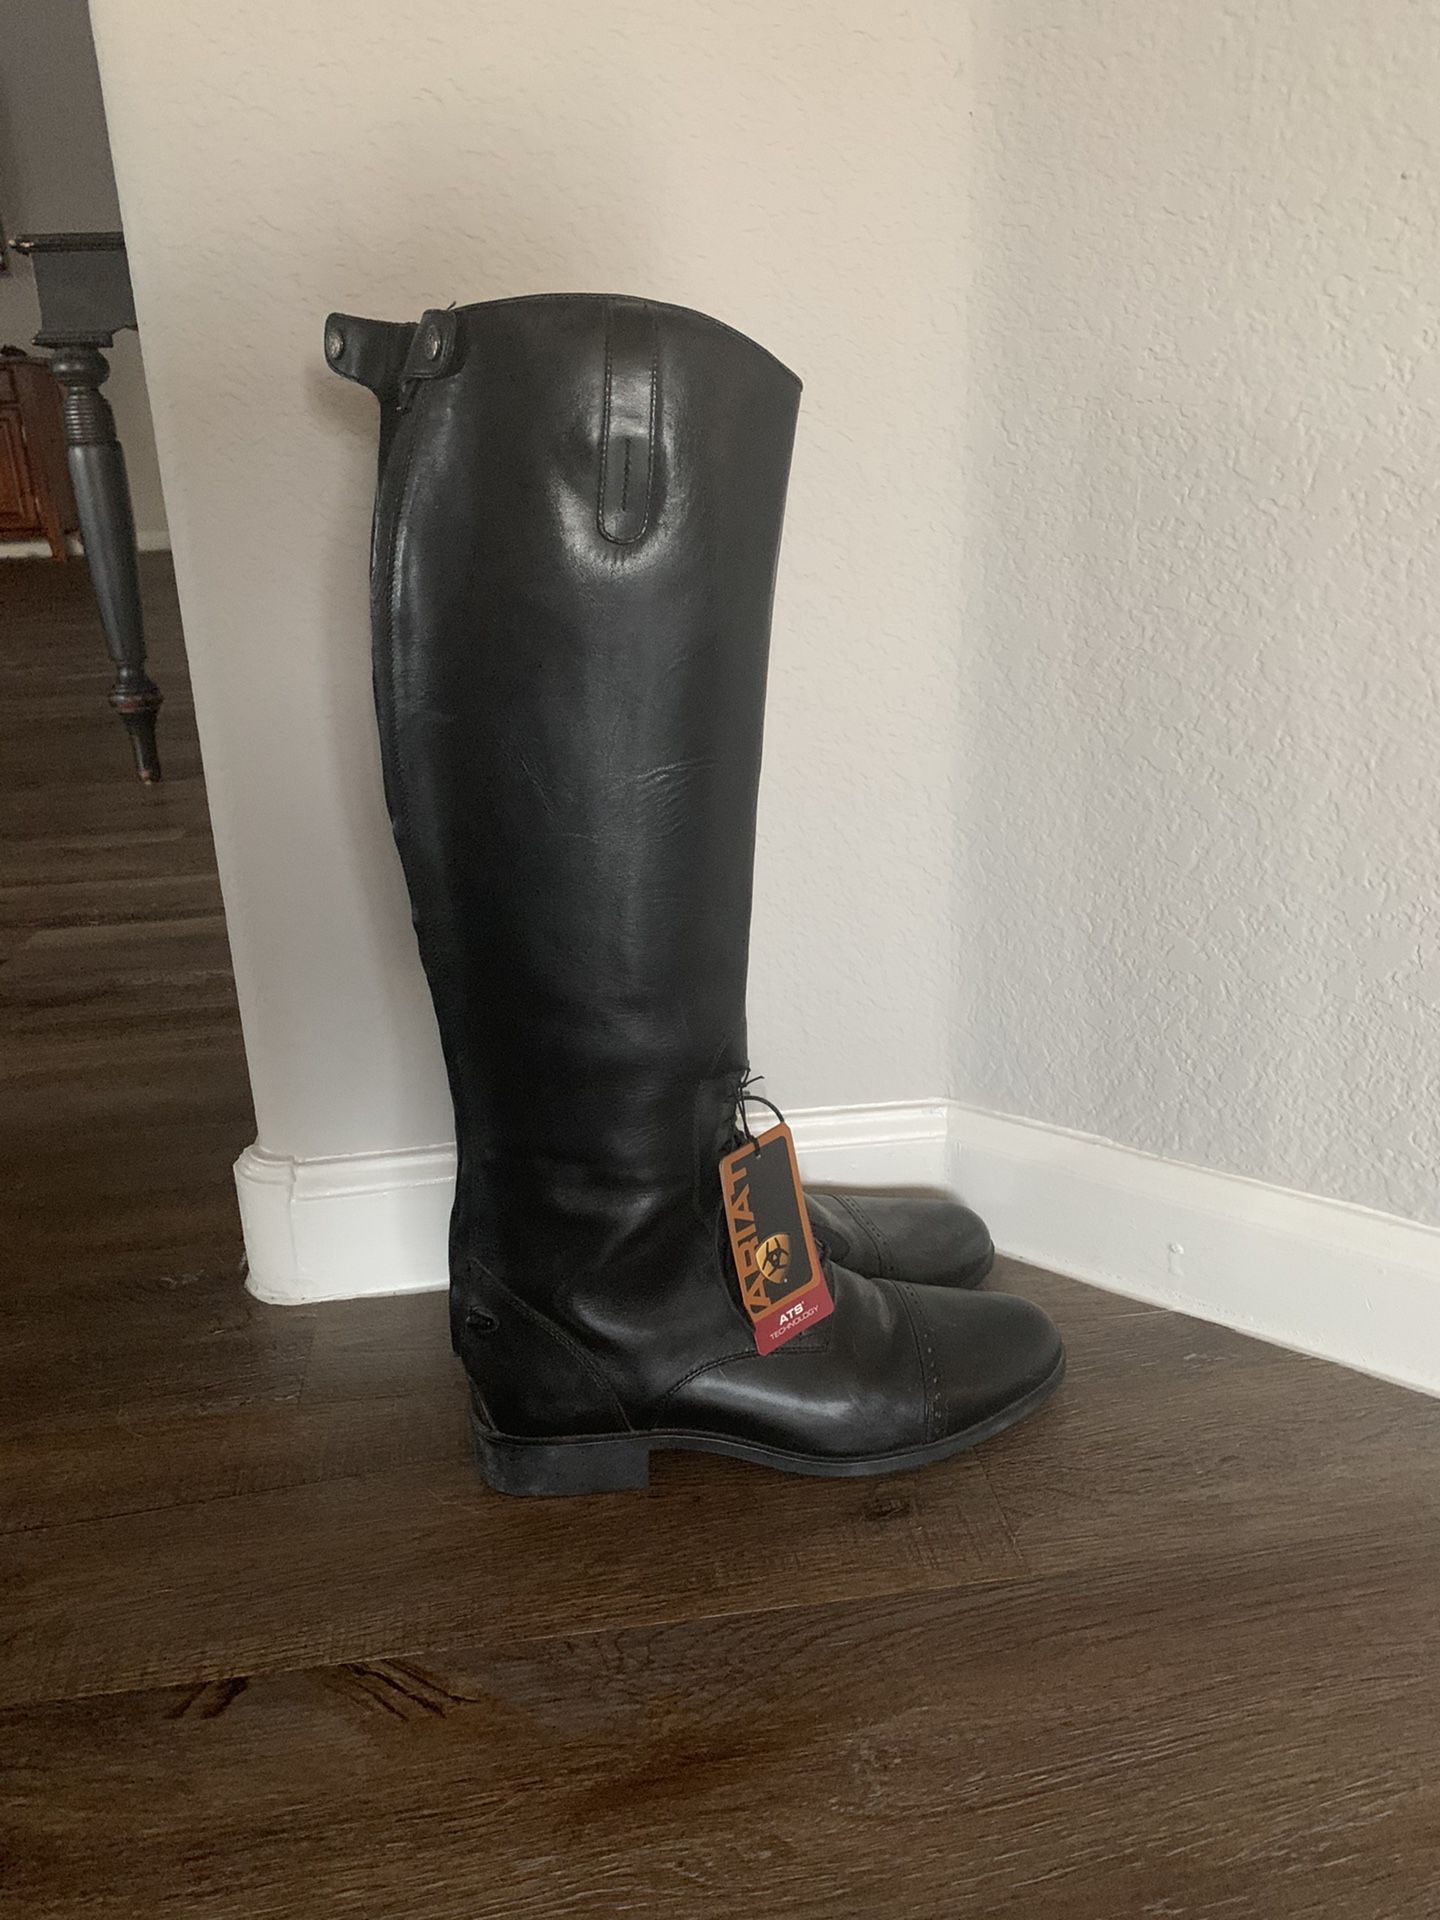 Ariat English jumping challenge field boot zip size 11